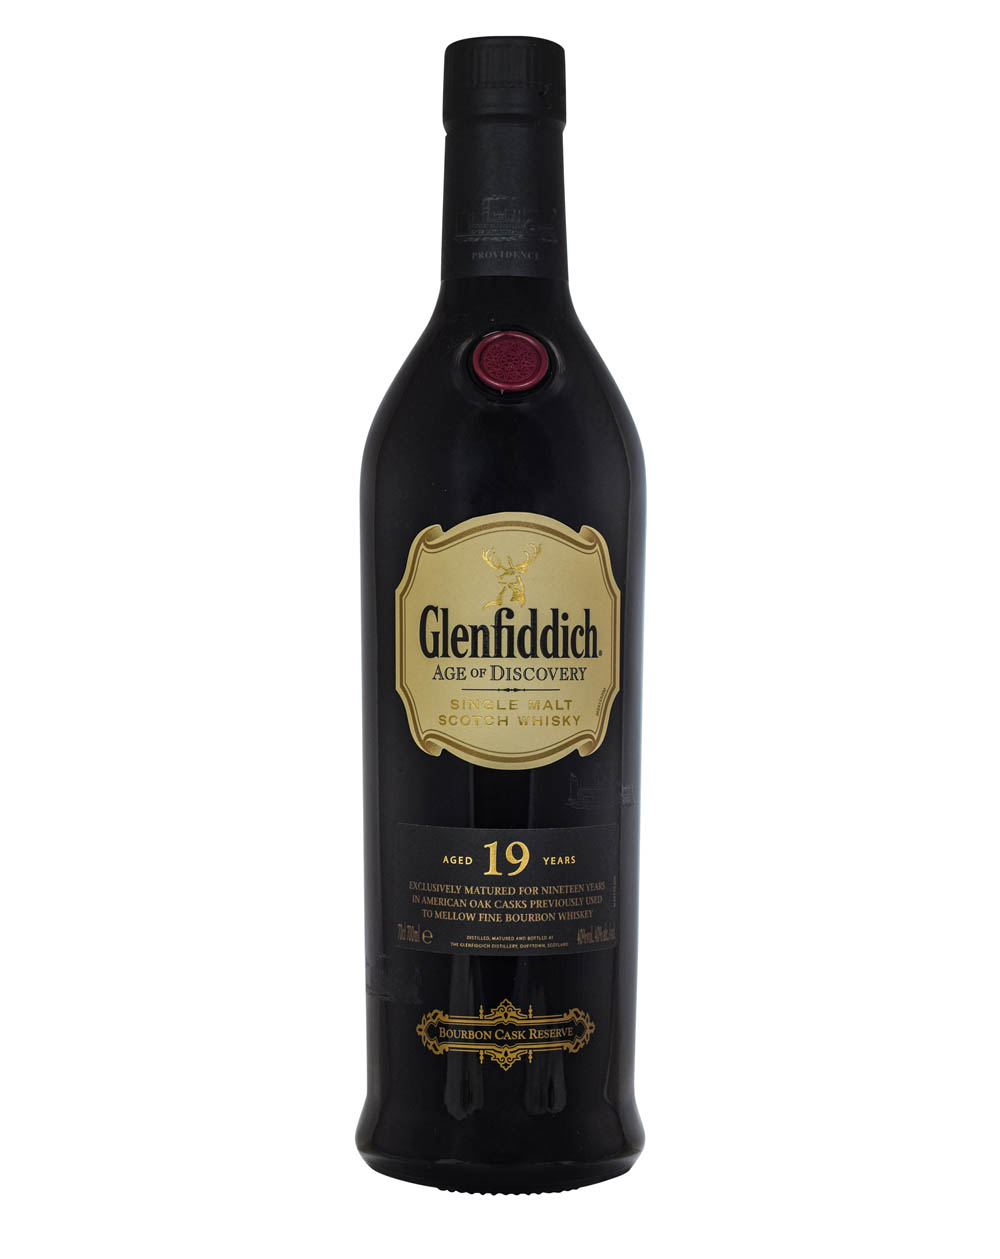 Glenfiddich Age of Discovery Bourbon Cask Reserve 19 Years Old Musthave Malts MHM